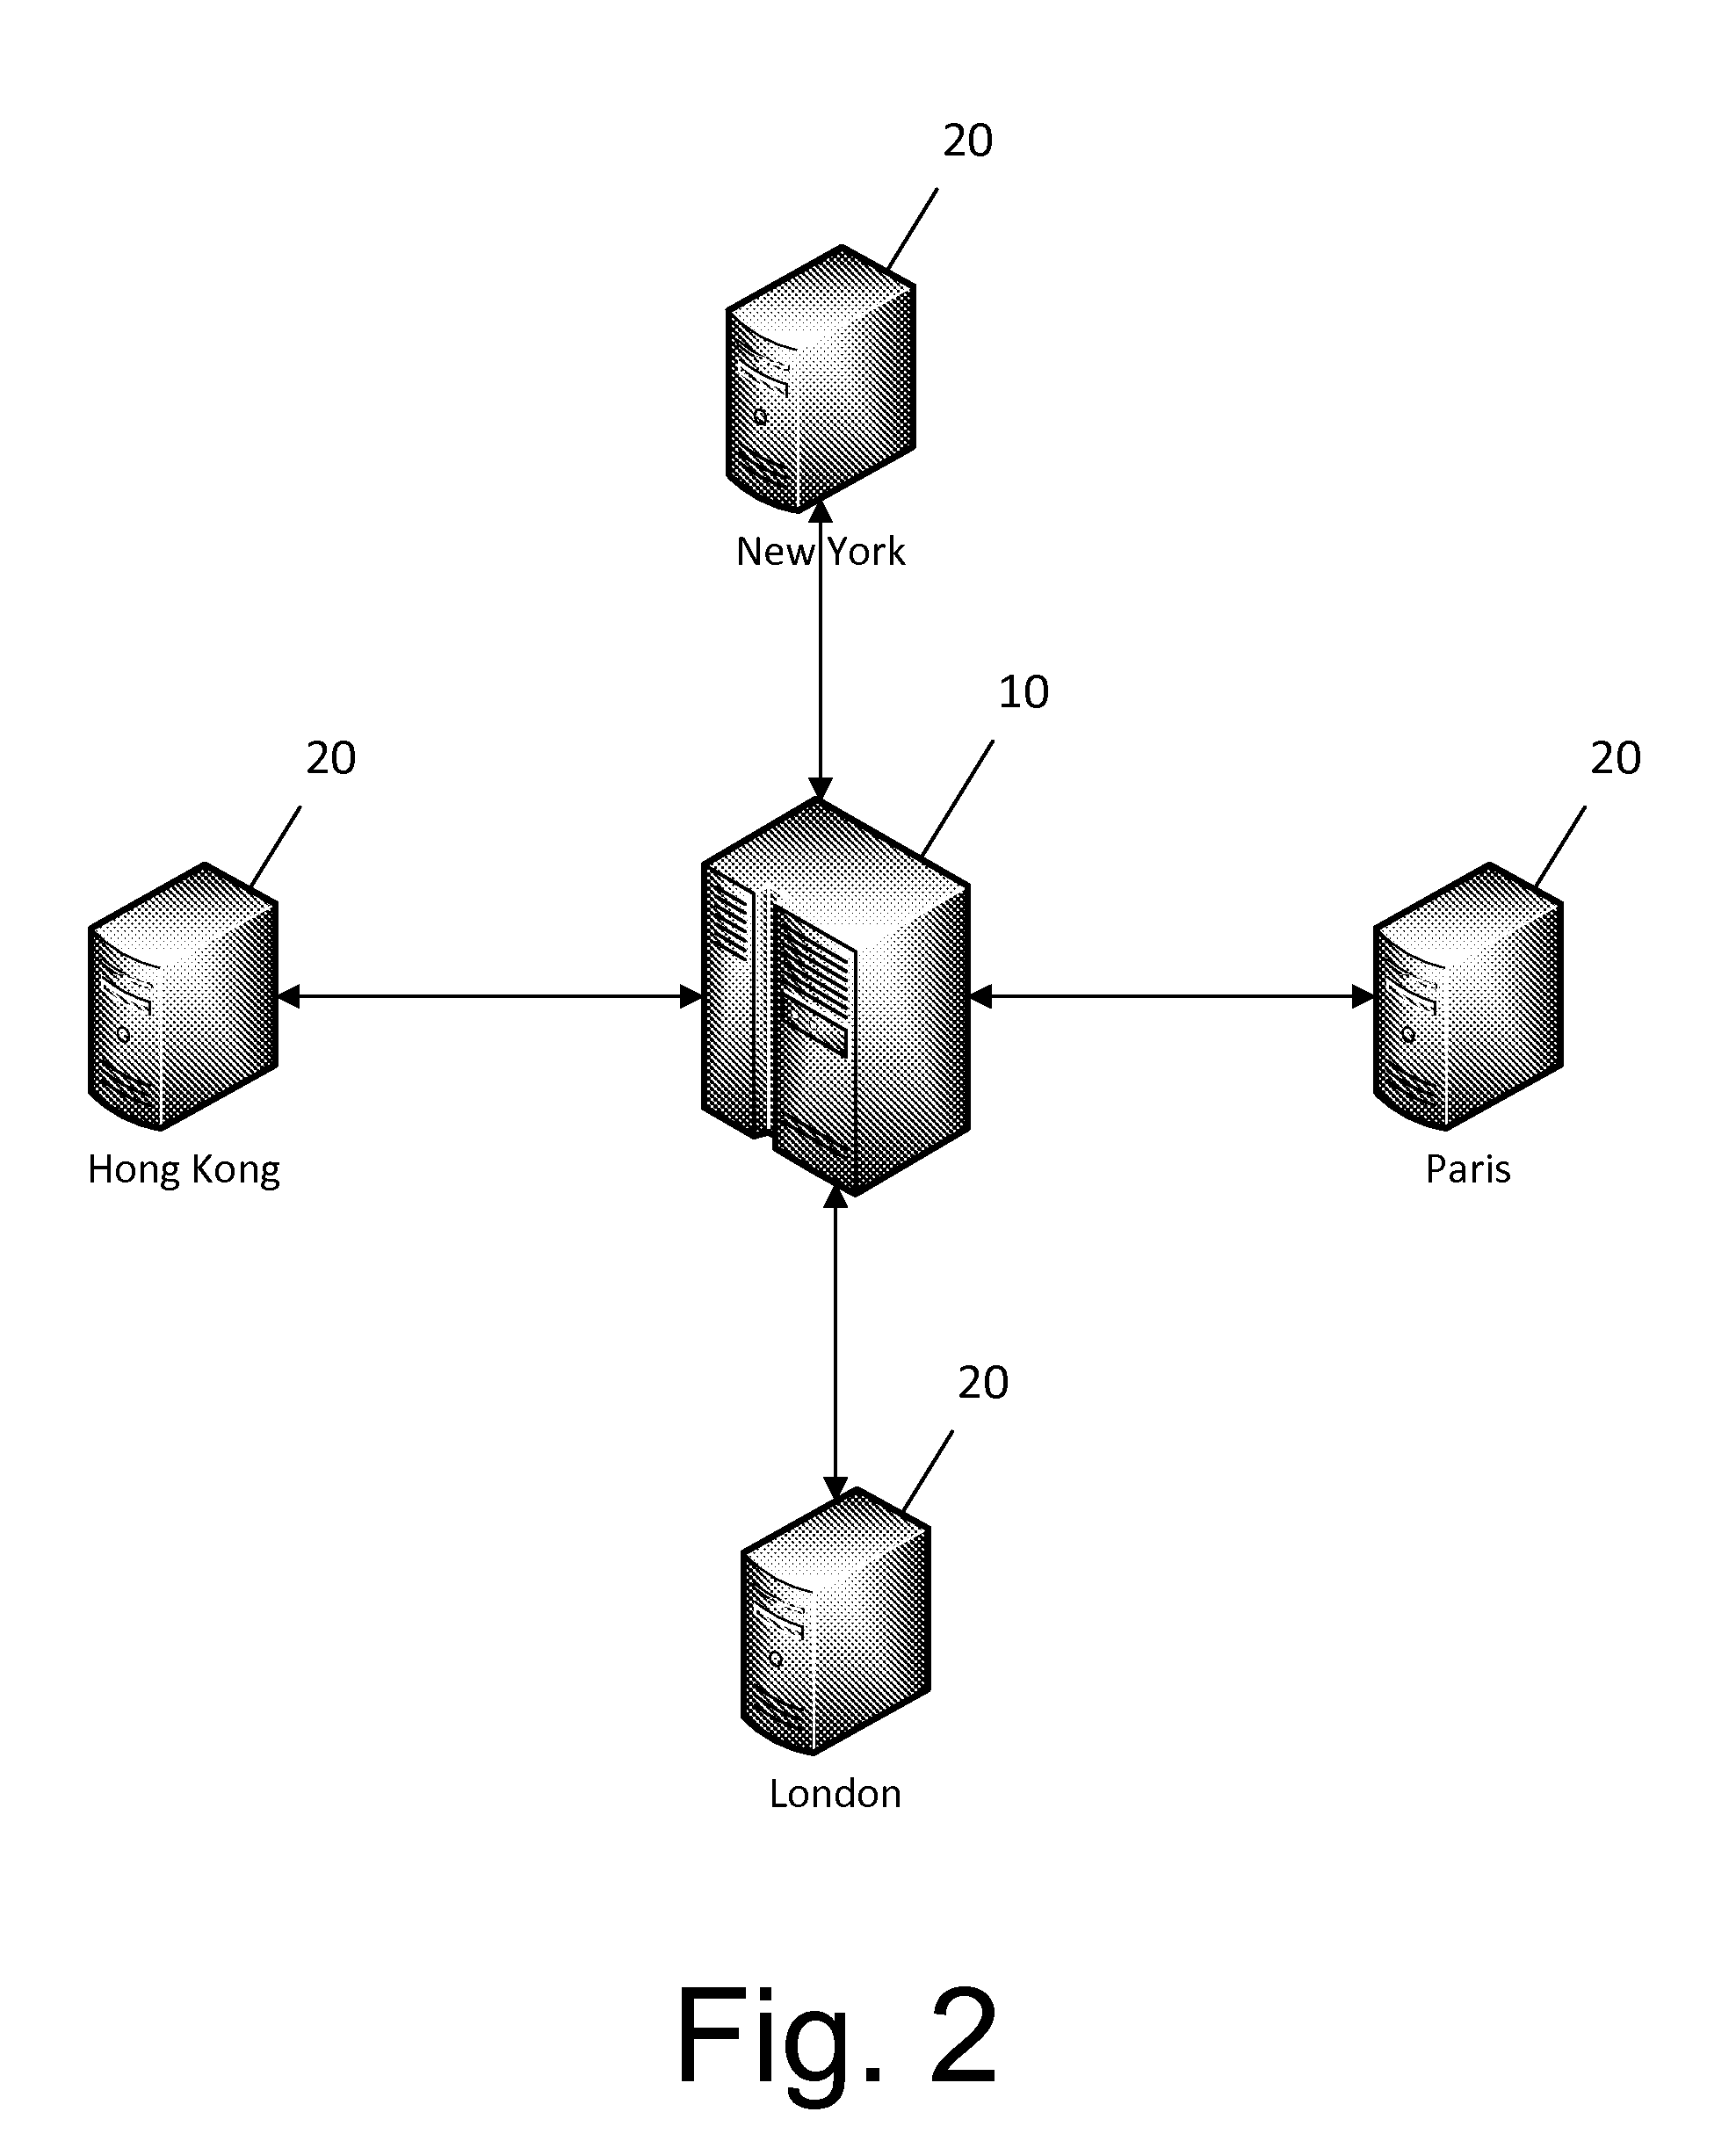 Method for Personalization and Utilization of a Series of Connected Devices